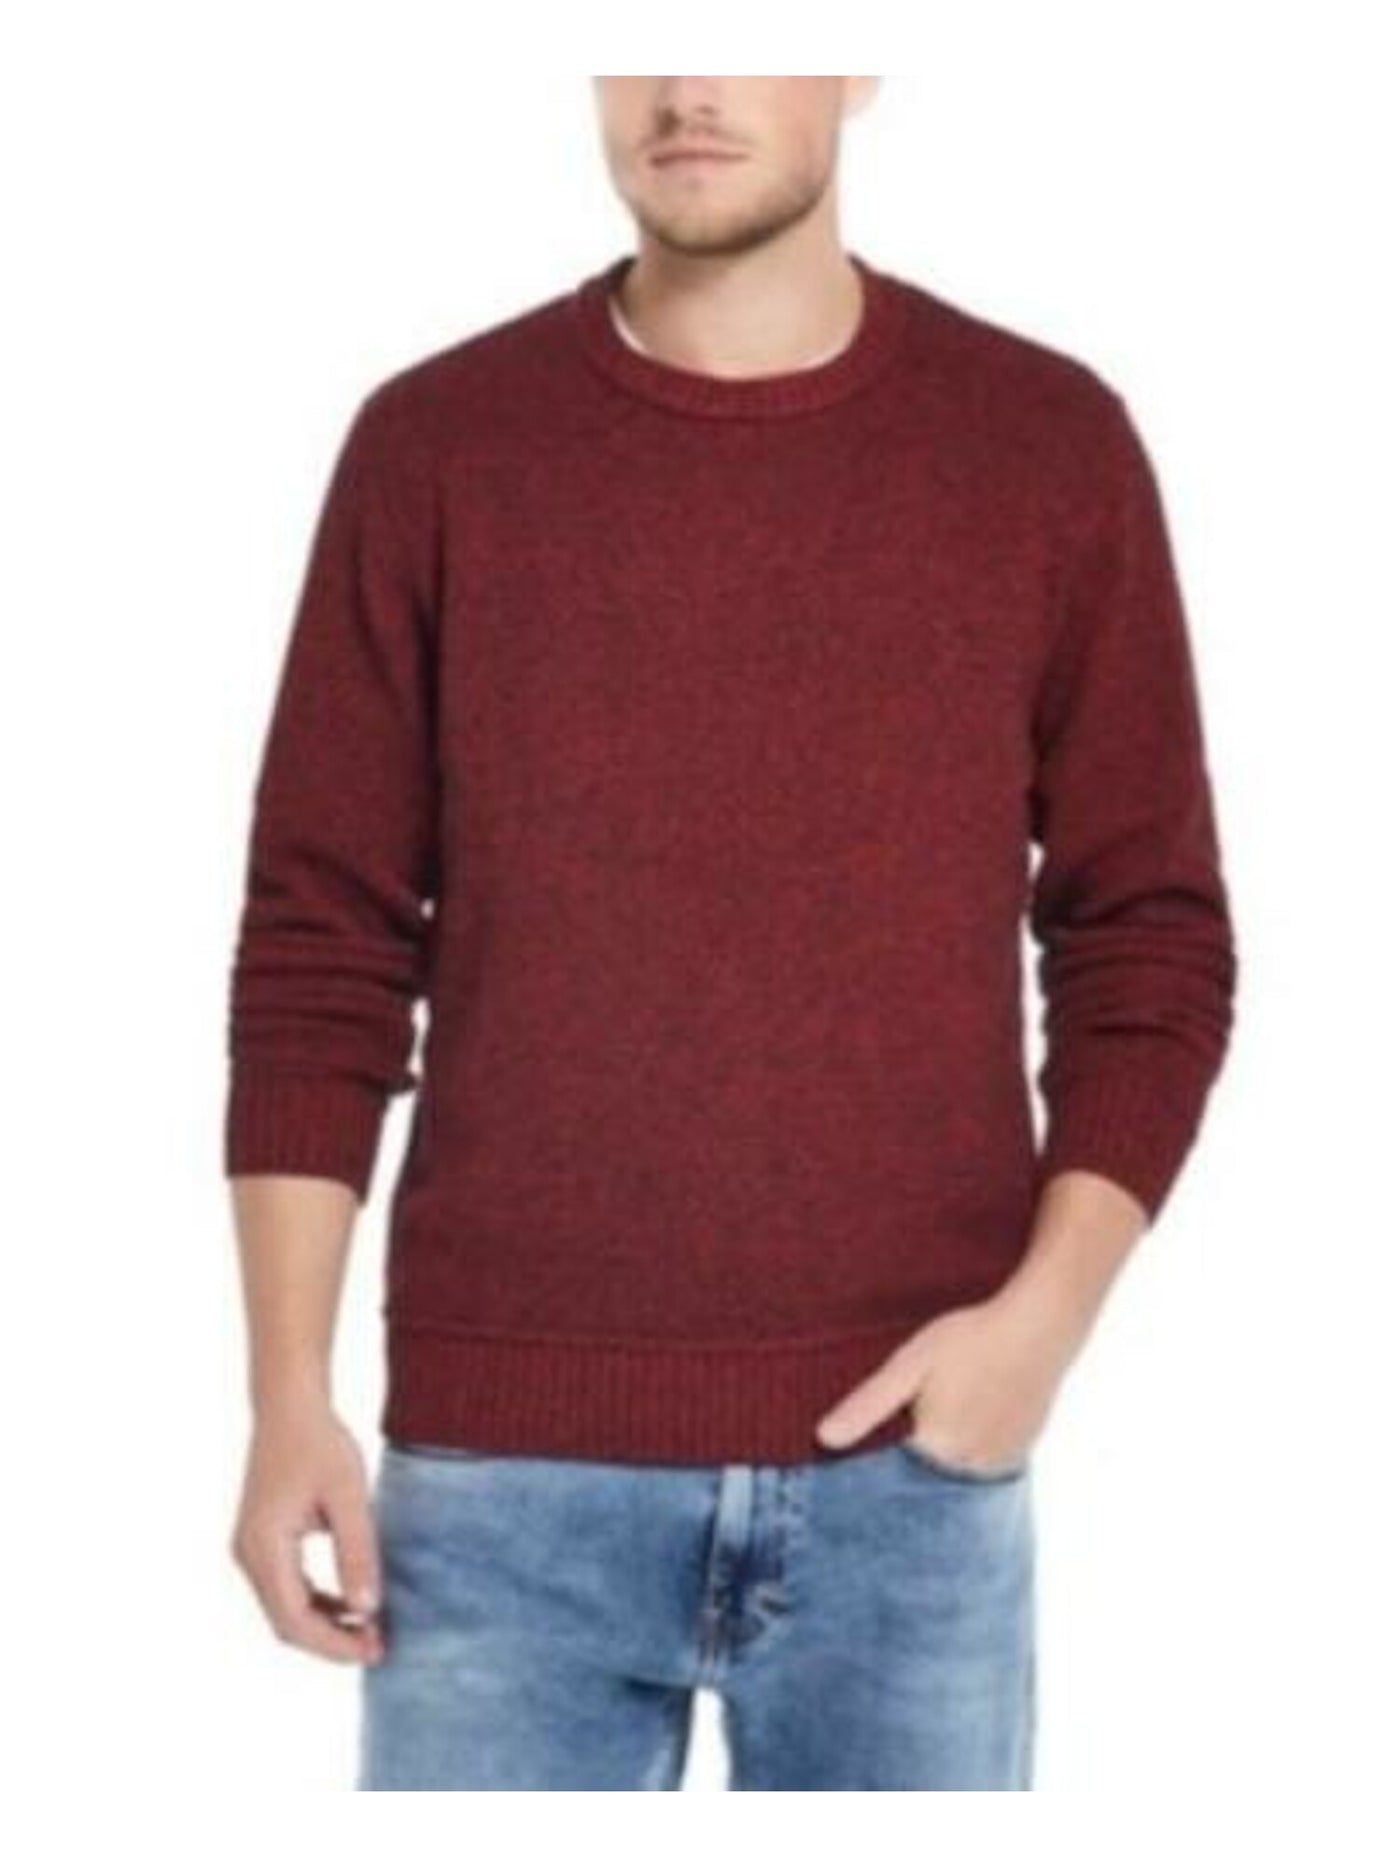 WEATHERPROOF VINTAGE Mens Red Curved Hem Patterned Long Sleeve Crew Neck Classic Fit Knit Pullover Sweater S